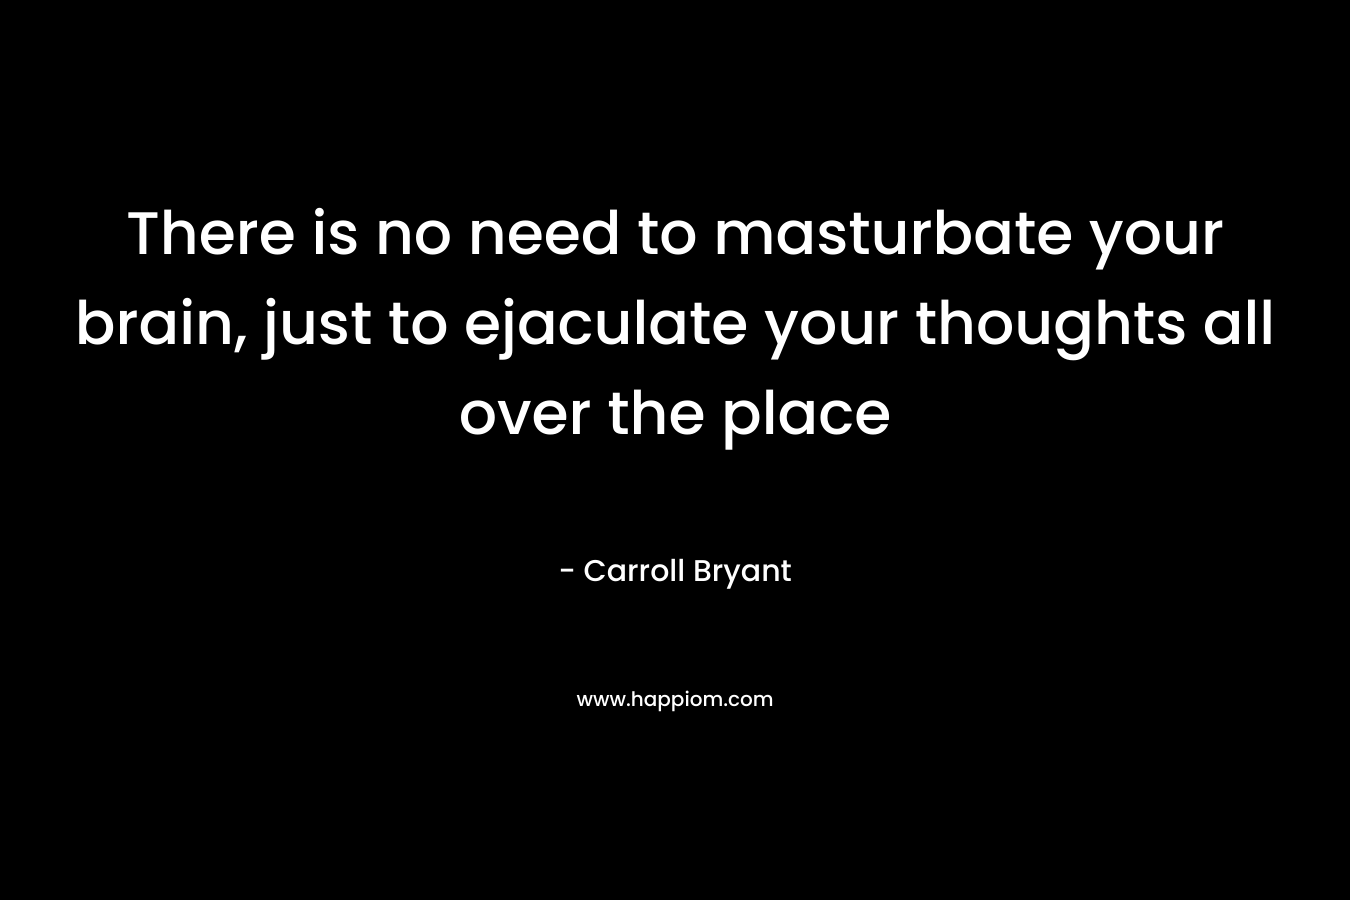 There is no need to masturbate your brain, just to ejaculate your thoughts all over the place – Carroll Bryant